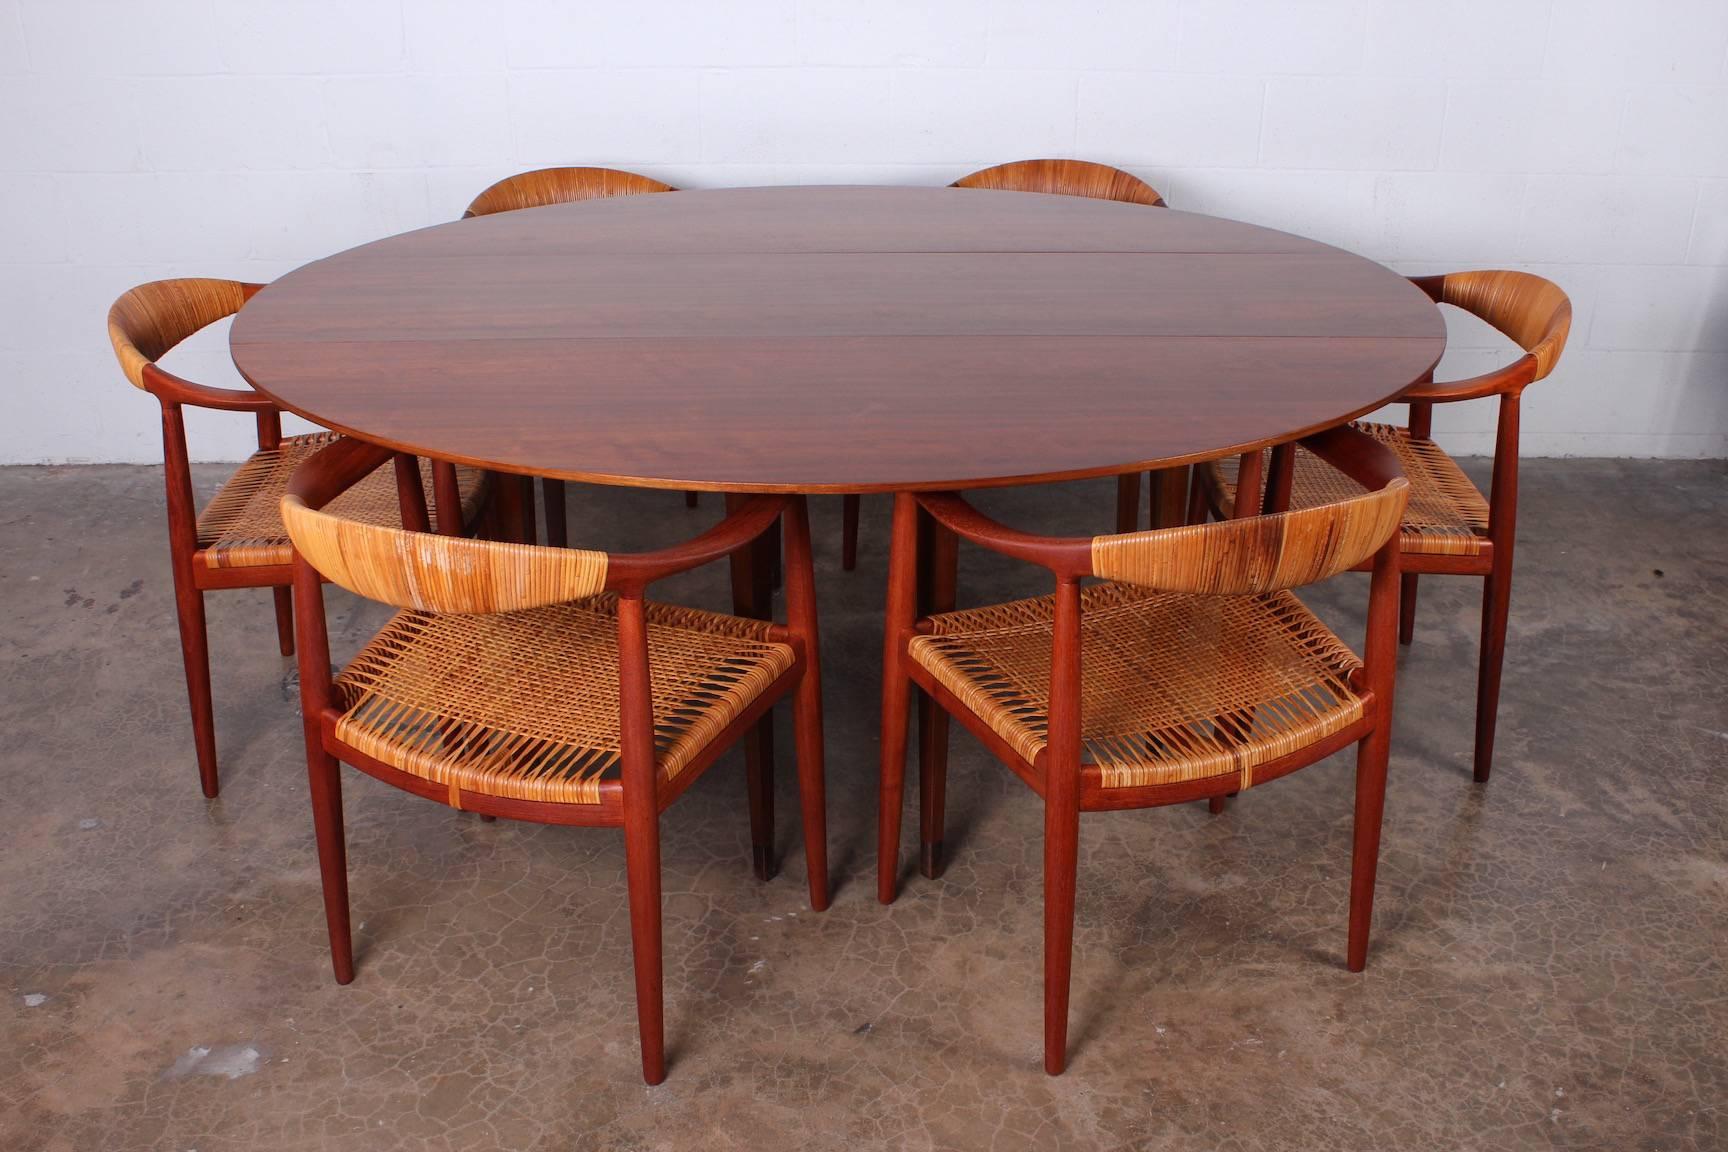 A beautiful and versatile drop-leaf console/dining table designed by Edward Wormley for Dunbar. Walnut with leather sabots to each leg.
Measures: 18.25 x 72 x 29 closed
60 x 72 x 29 open.